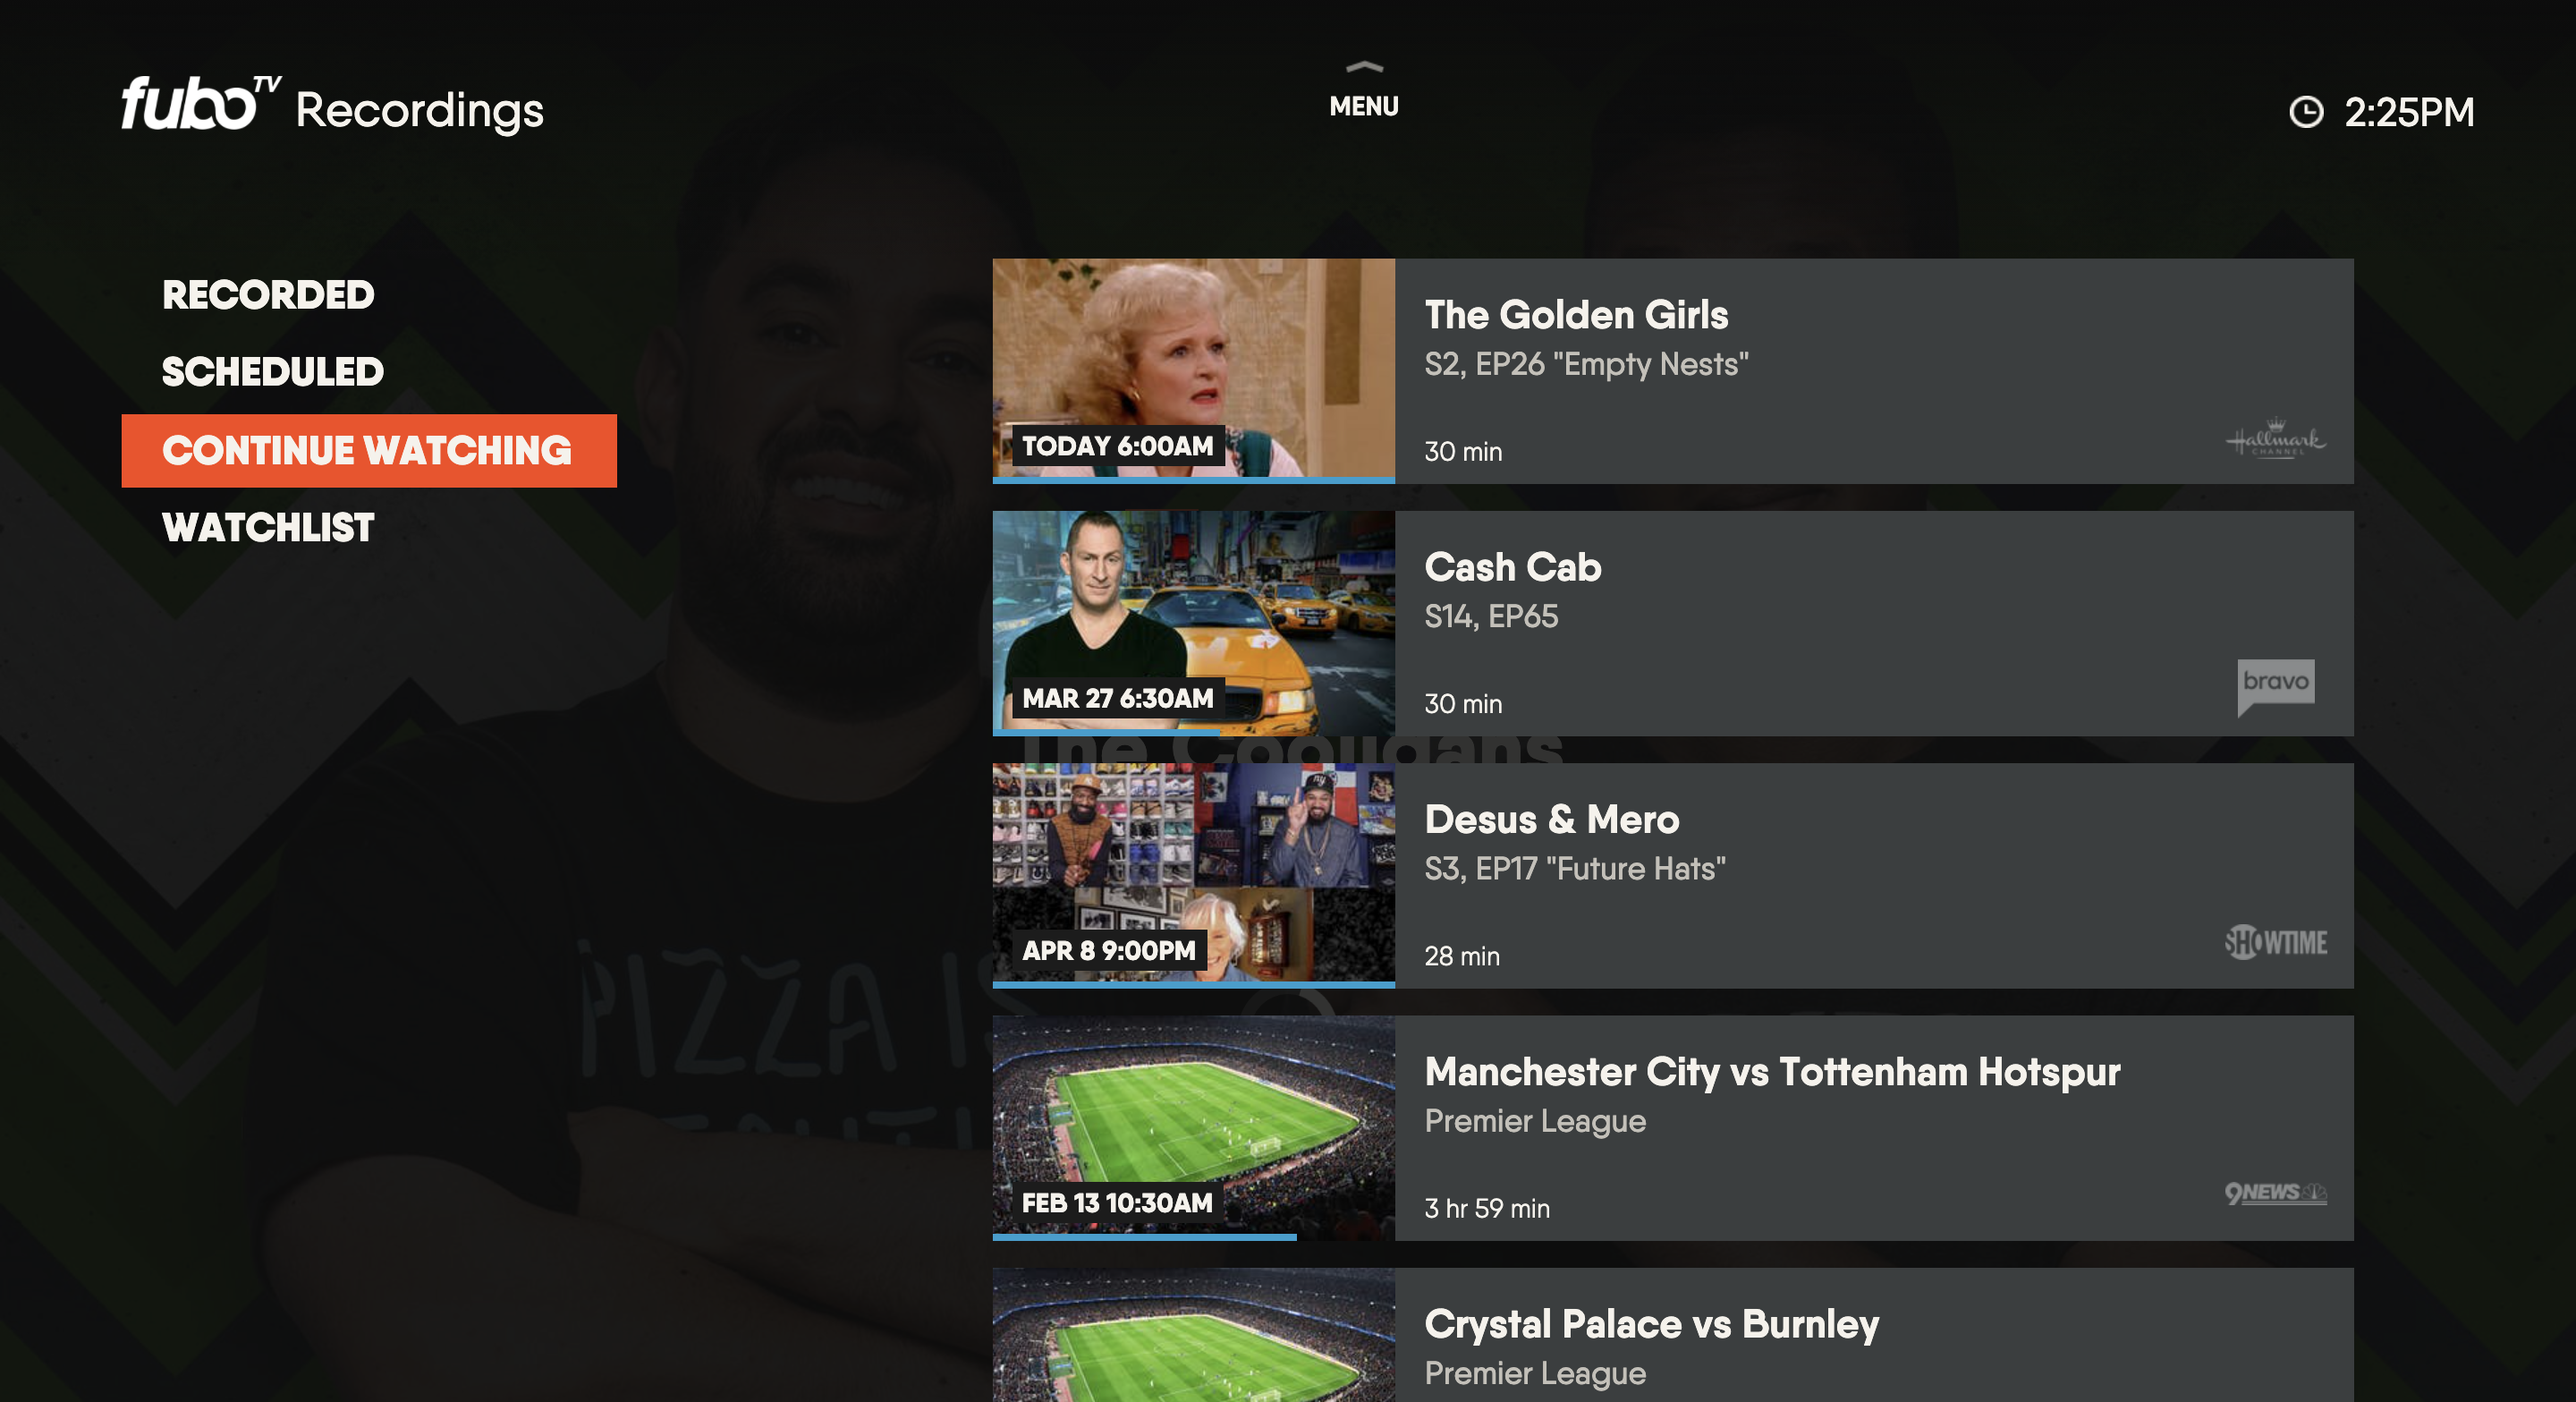 Previously-viewed programming shown from the CONTINUE WATCHING tab of the MY STUFF page for the FuboTV app on LG TV